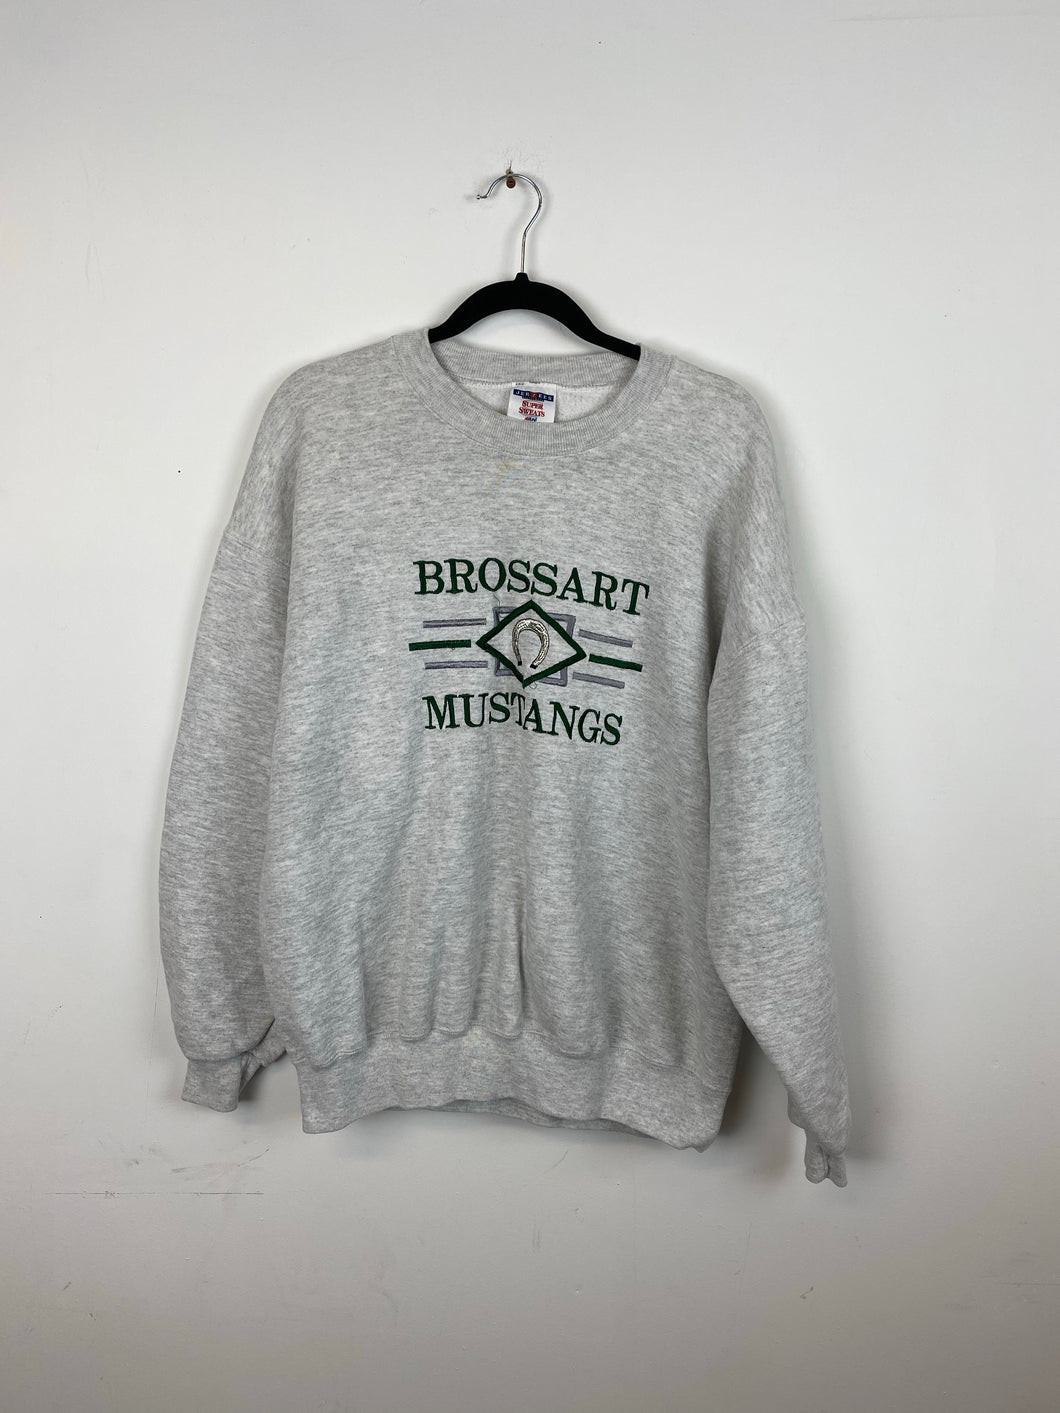 Embroidered Brossart Mustangs crewneck